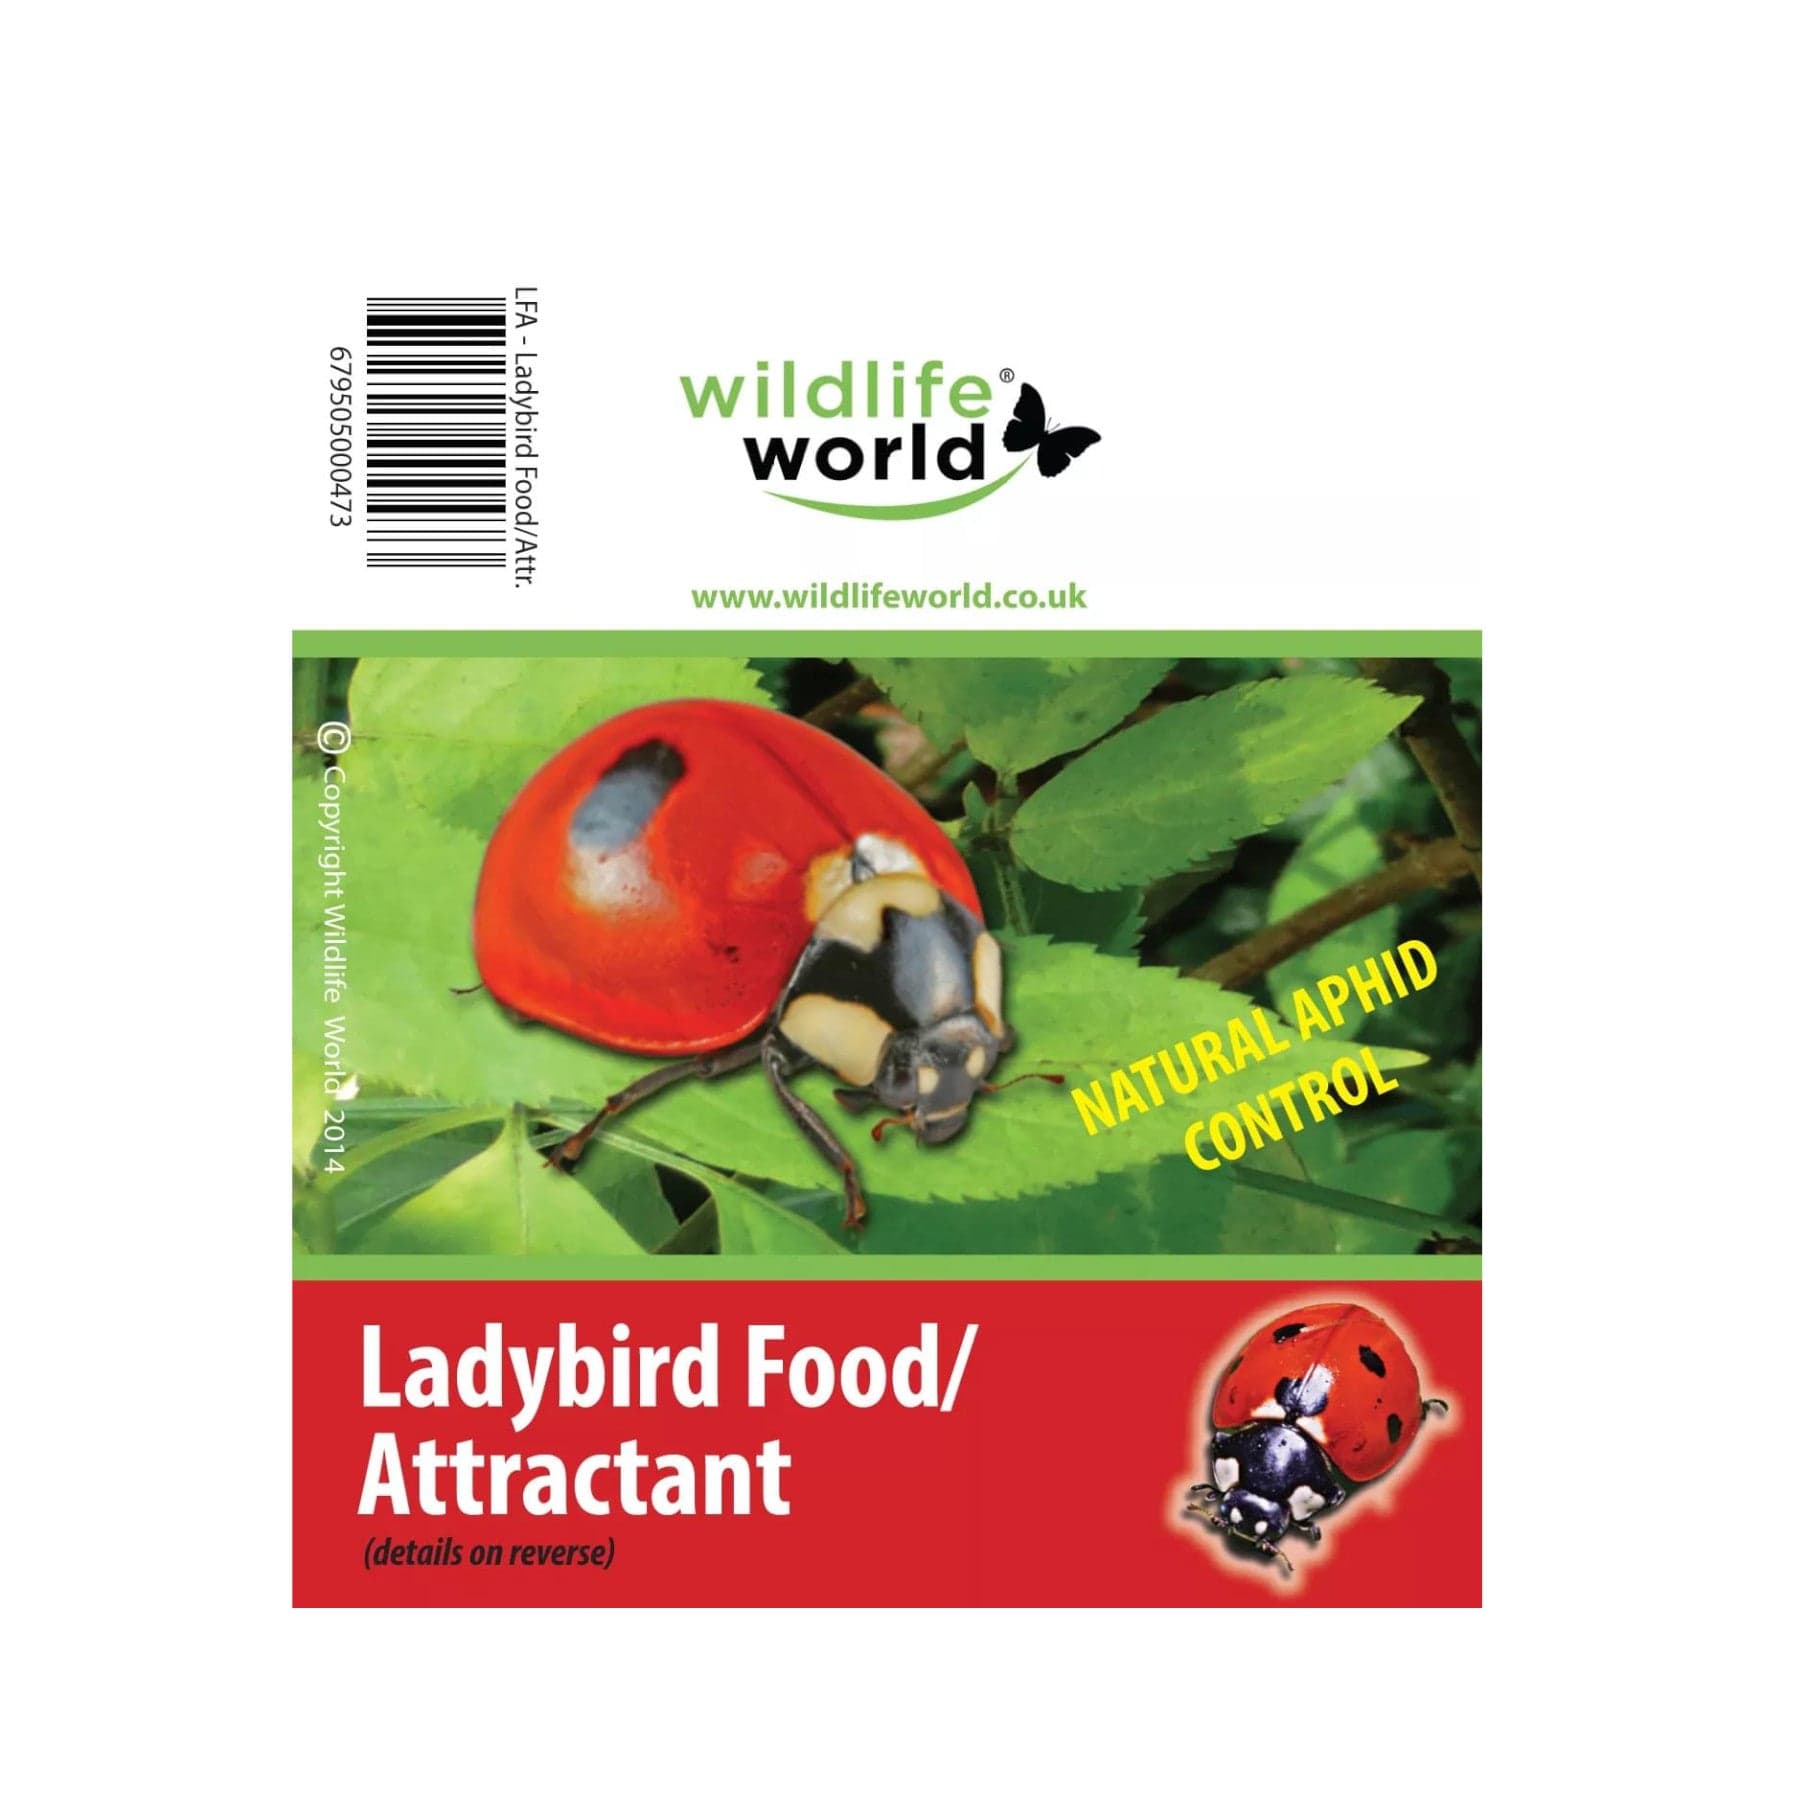 Ladybird on green leaf with Wildlife World logo, promoting natural aphid control, ladybird food and attractant with website address and barcode visible.